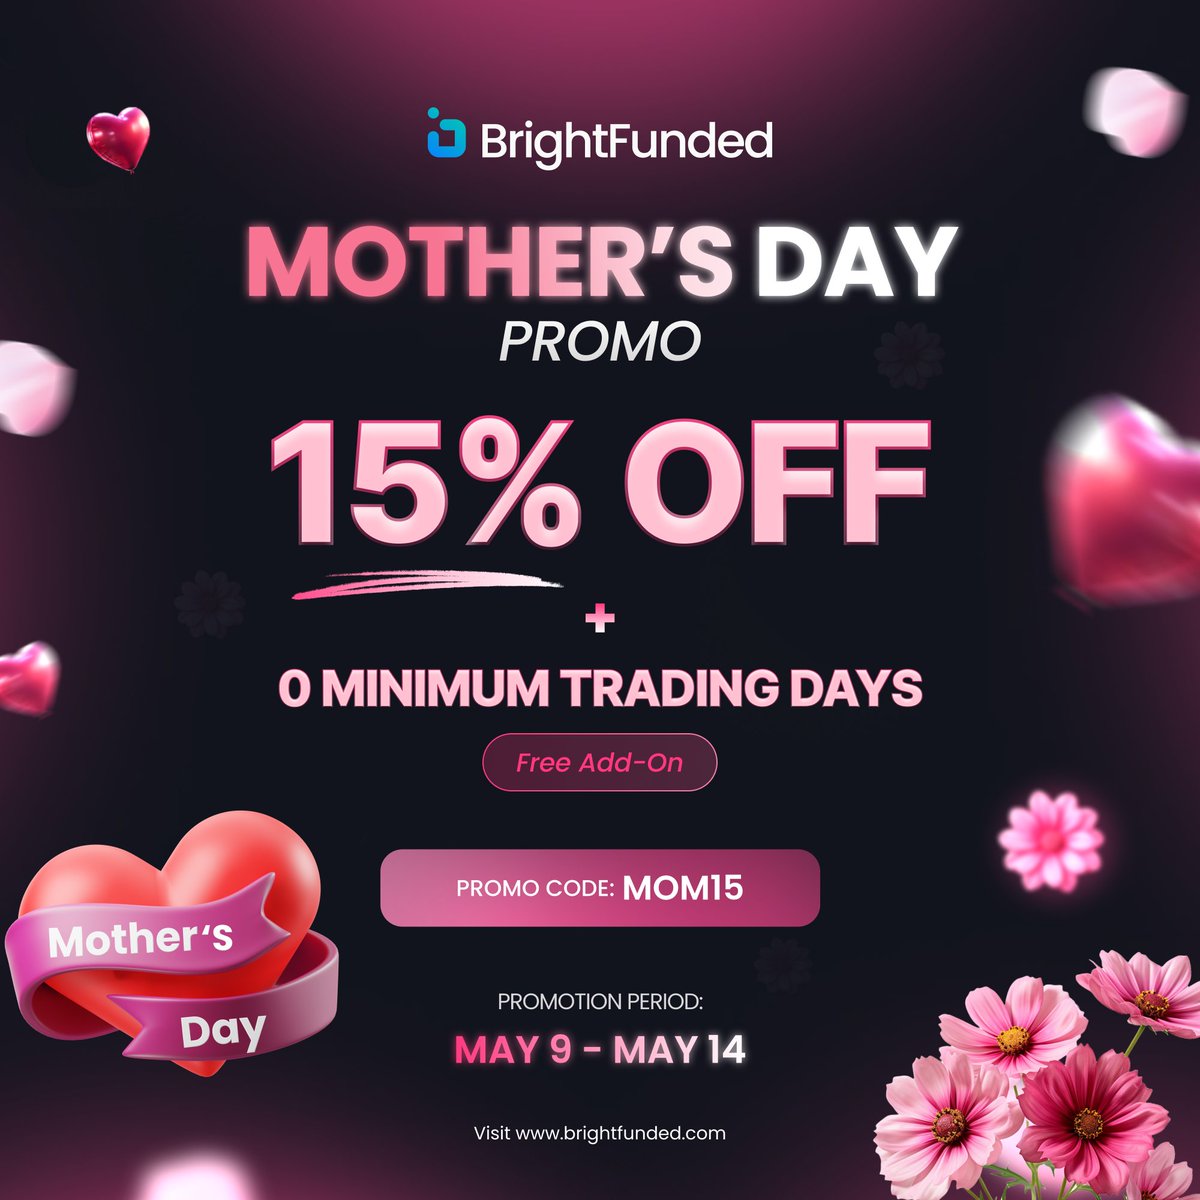 MOTHER’S DAY PROMO Honoring all the amazing mothers around the world, we've launched a special limited-time Mother's Day Promo! 🌷💕 15% OFF + 0 MINIMUM TRADING DAYS (Free Add-On) Use Code: MOM15 Get Funded ➡️ BrightFunded.com